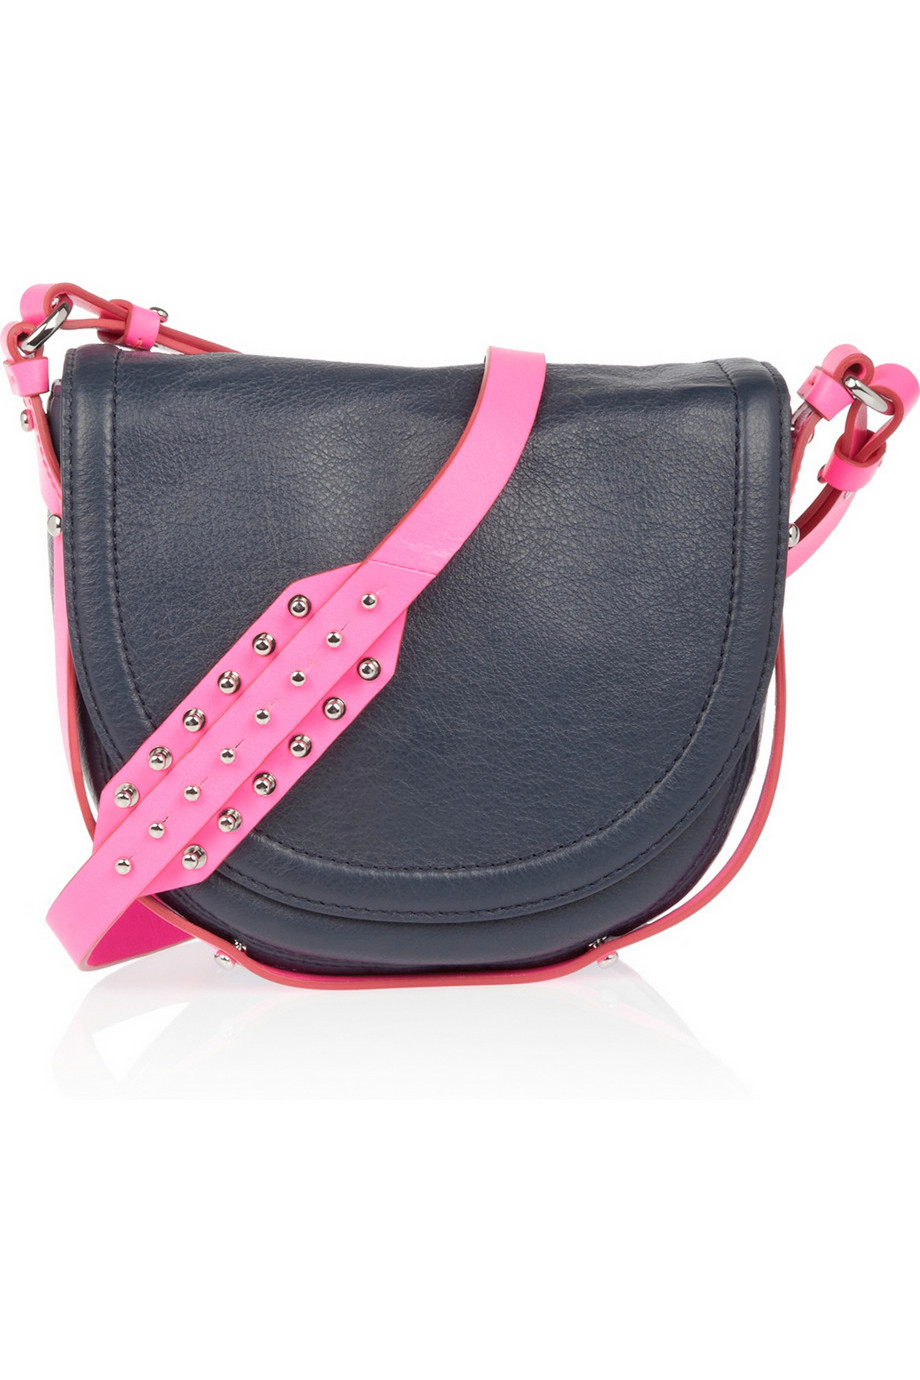 McQ Amwell Leather Shoulder Bag in Pink (Gray) - Lyst